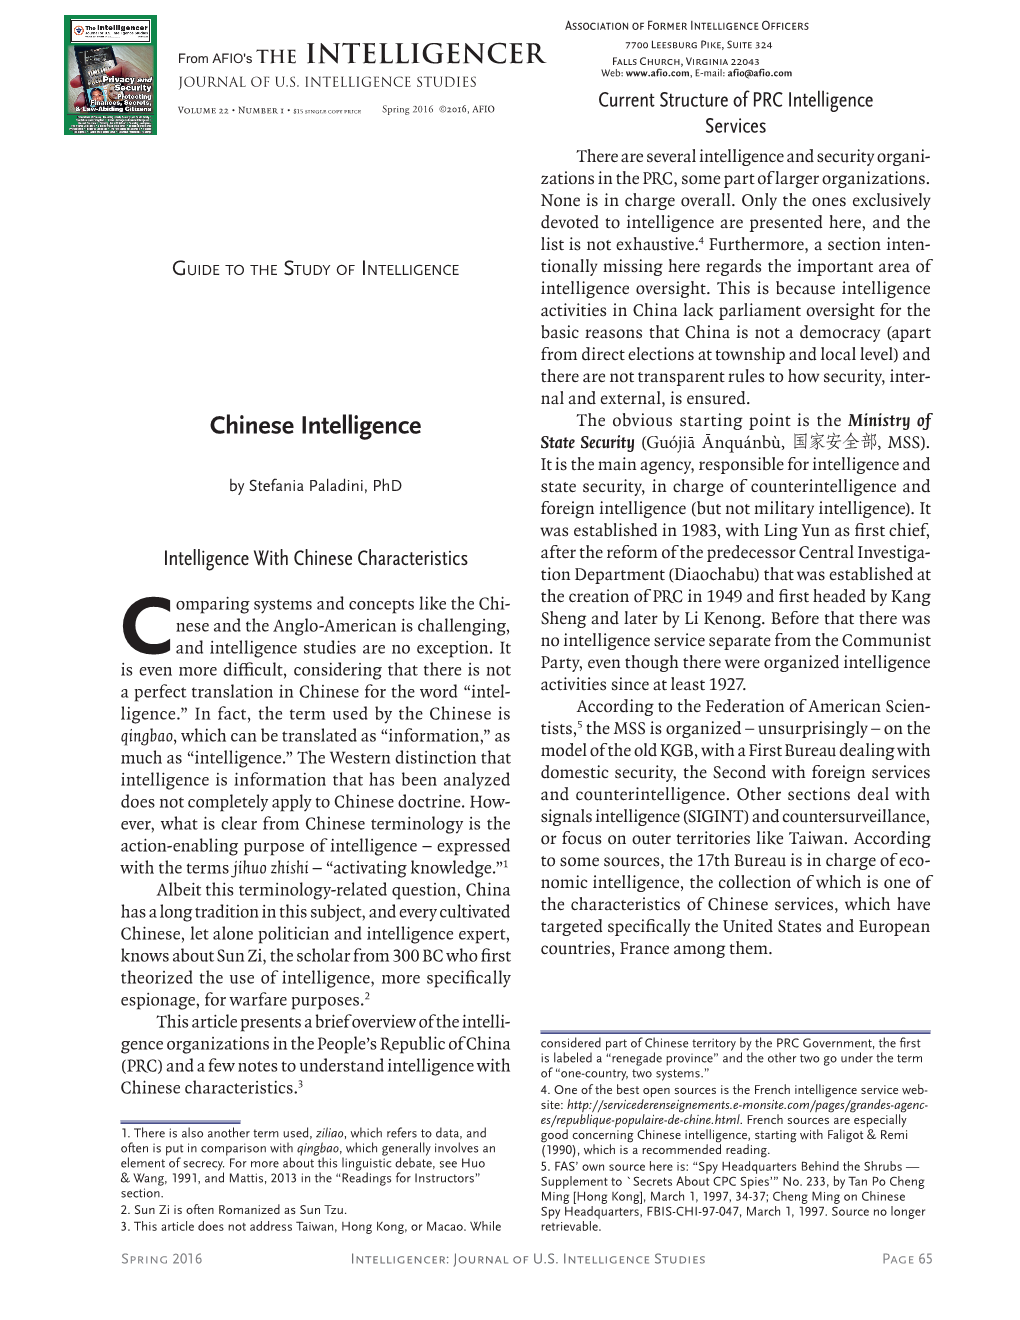 Chinese Intelligence from AFIO's the INTELLIGENCER